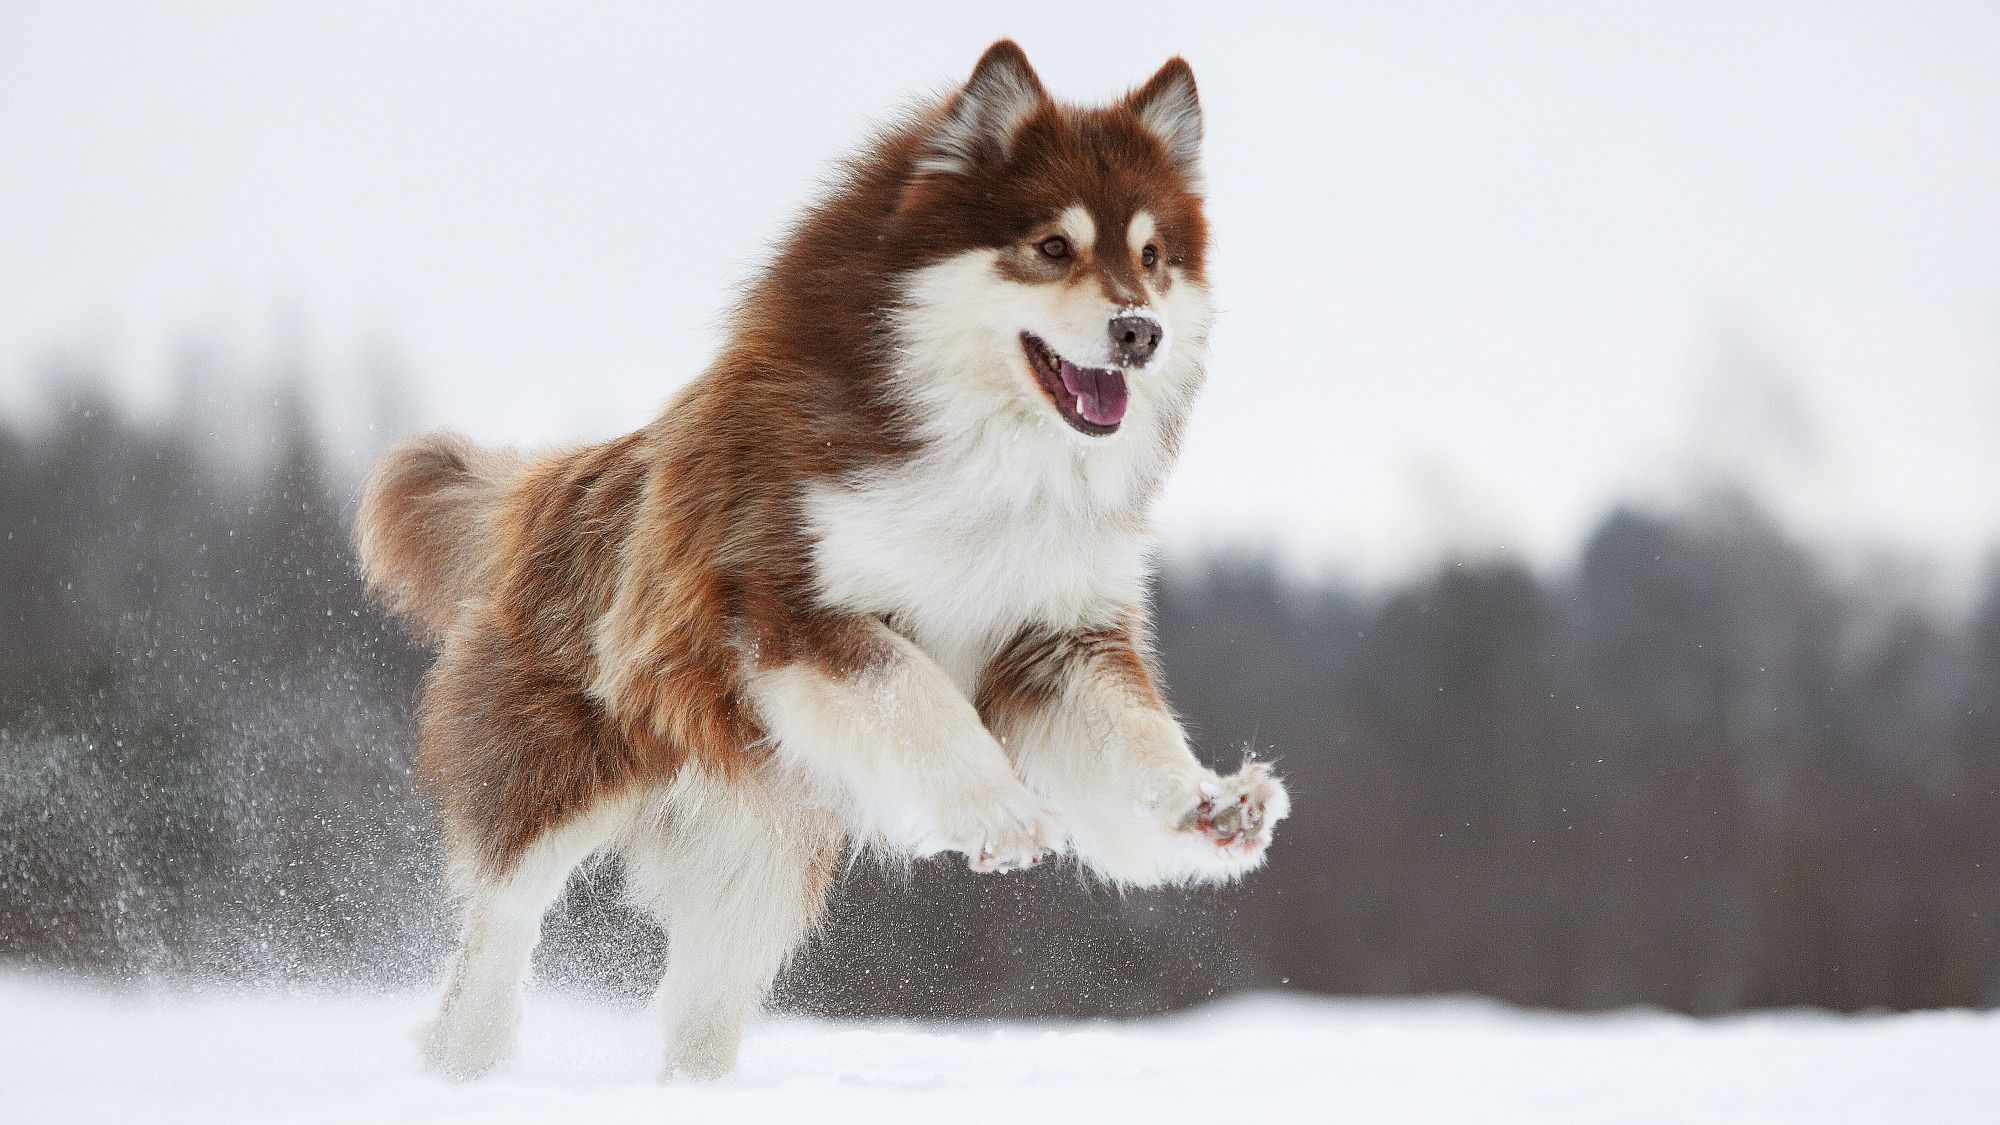 Brown Finnish Lapphund bounding over a snowy field